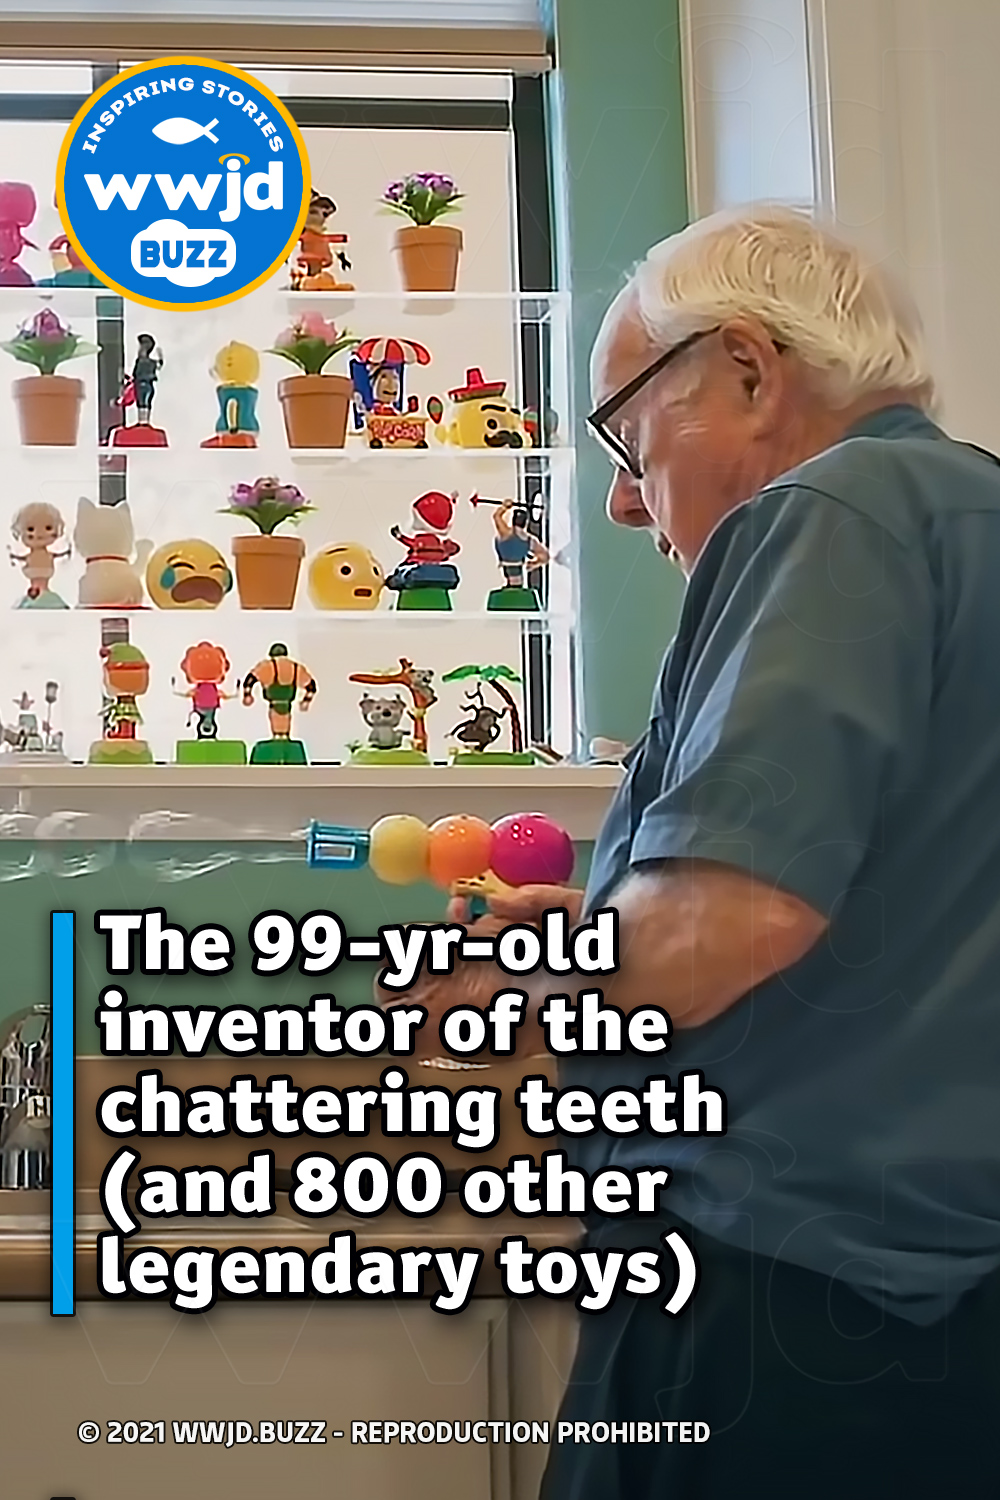 The 99-yr-old inventor of the chattering teeth (and 800 other legendary toys)